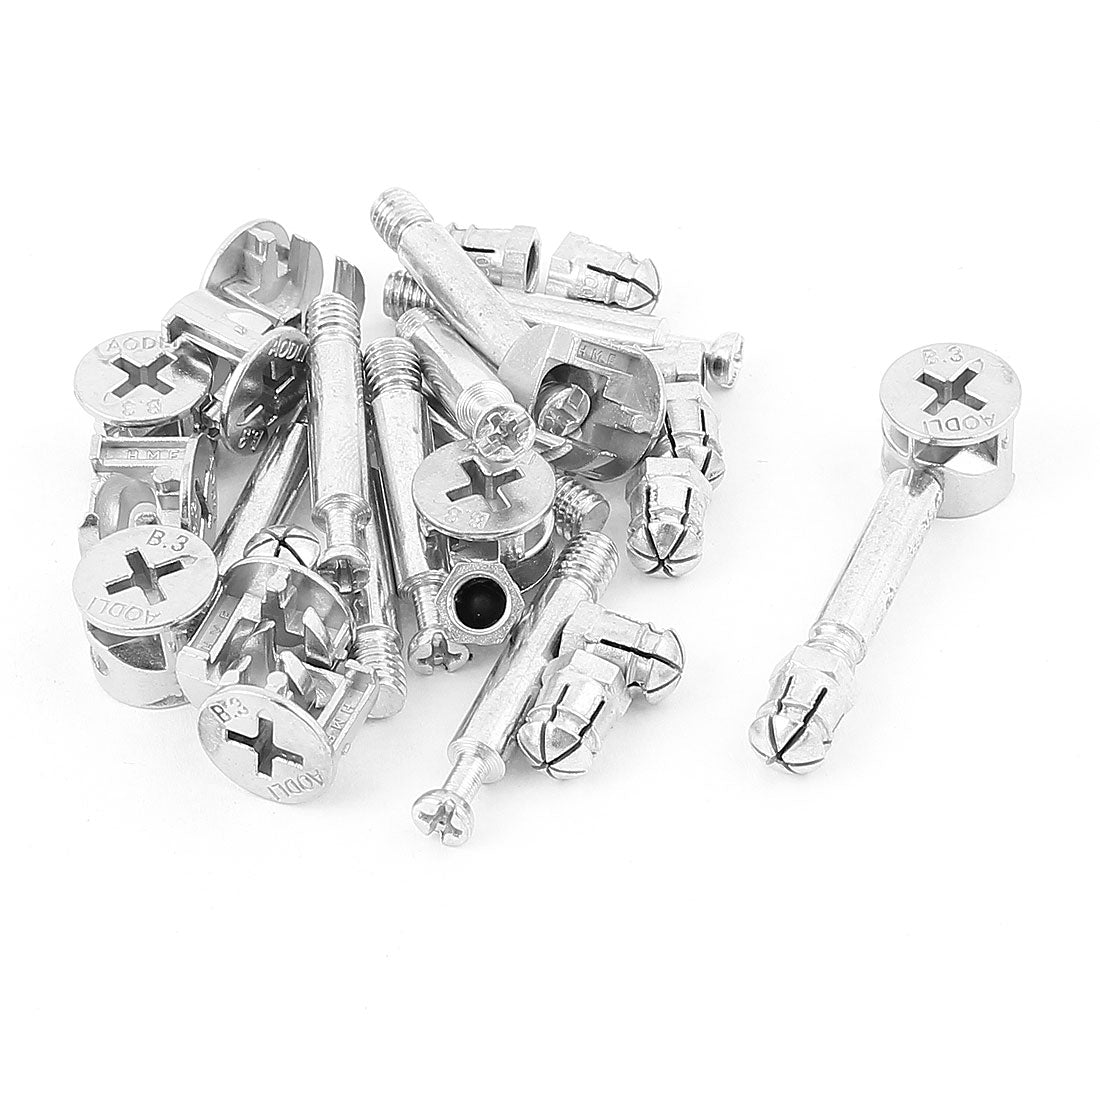 uxcell Uxcell Furniture Cabinet Fixing Screw Locking Eccentric Bolt Nut Fitting 10 Sets